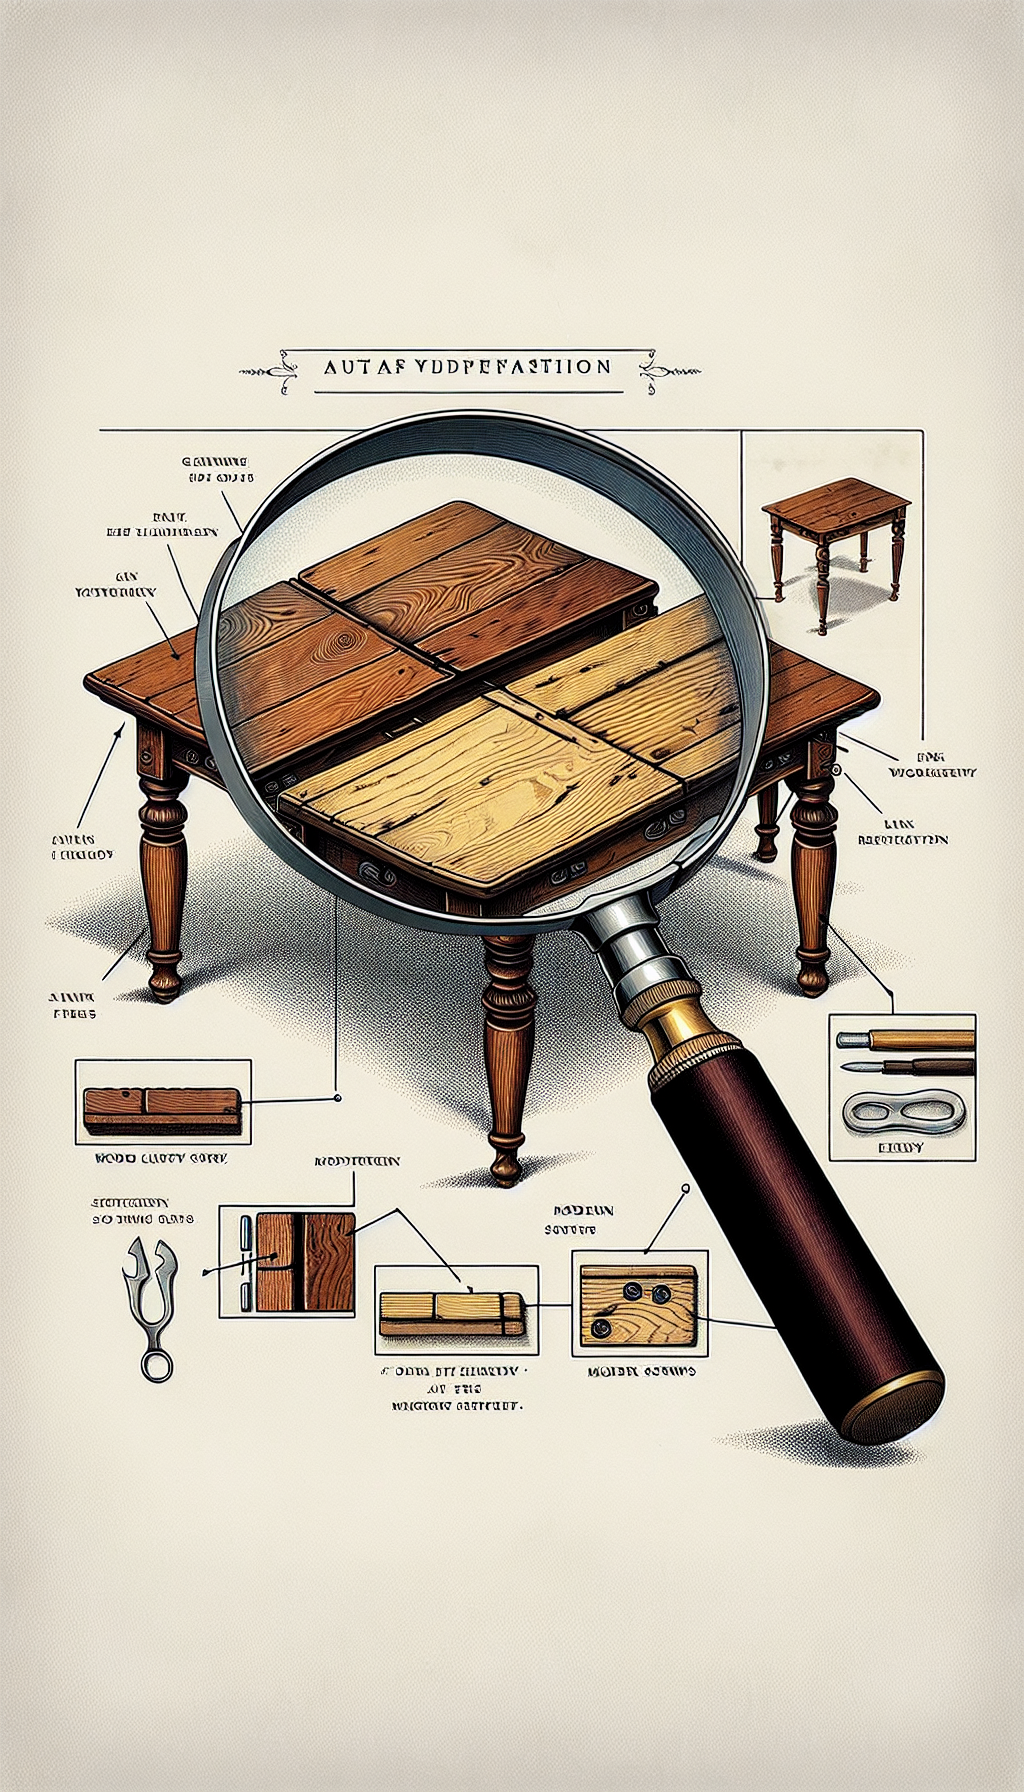 An illustration of a magnifying glass focusing on a drop leaf table, half authentic and half a reproduction, with subtle details emphasized such as wood grains, patina, and joint styles. The glass reveals labels like "genuine 18th-century joinery" on the authentic side, and "modern screws" on the reproduction, helping to visually summarize verification tips for antique authenticity.